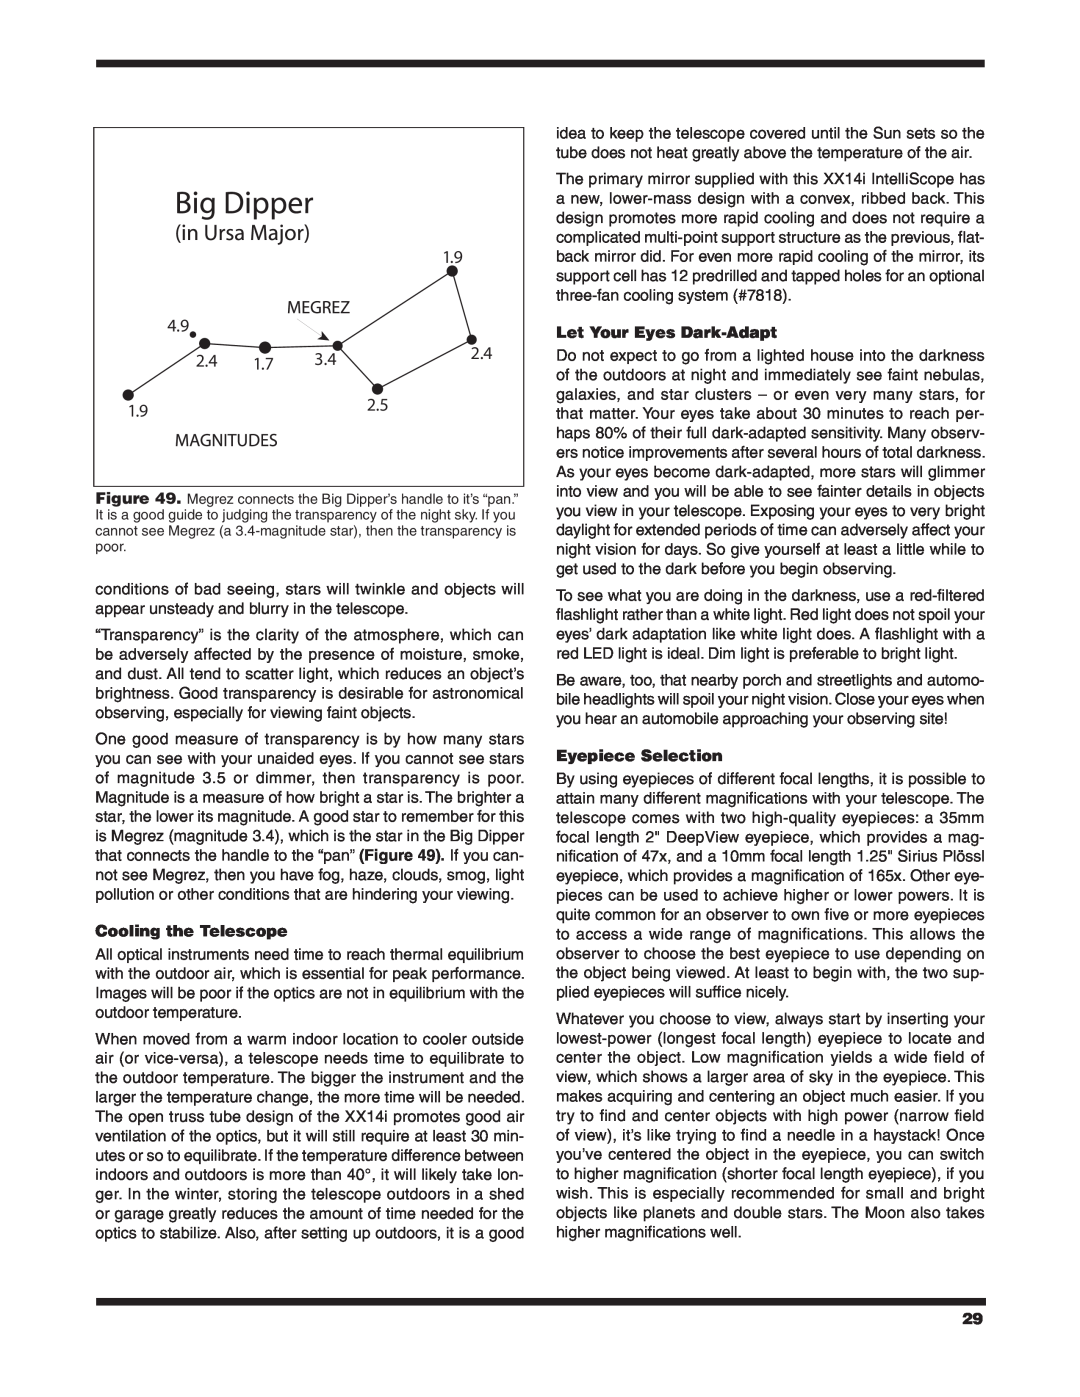 Orion XX14I instruction manual Cooling the Telescope, Let Your Eyes Dark-Adapt, Eyepiece Selection 